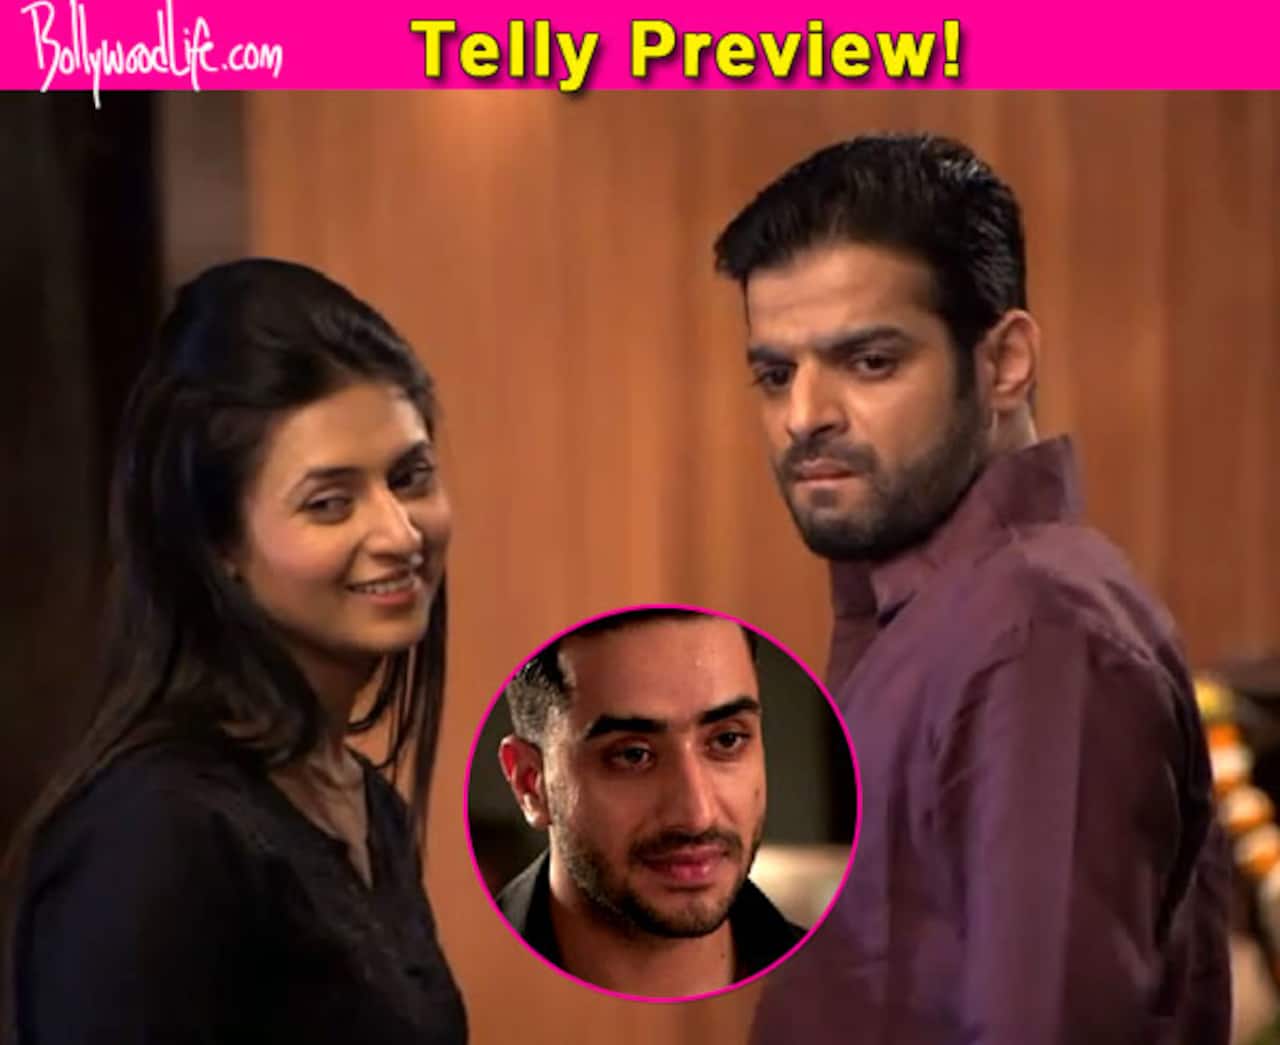 Yeh Hai Mohabbatein: Will Ishita trace Rohit’s actual mother?